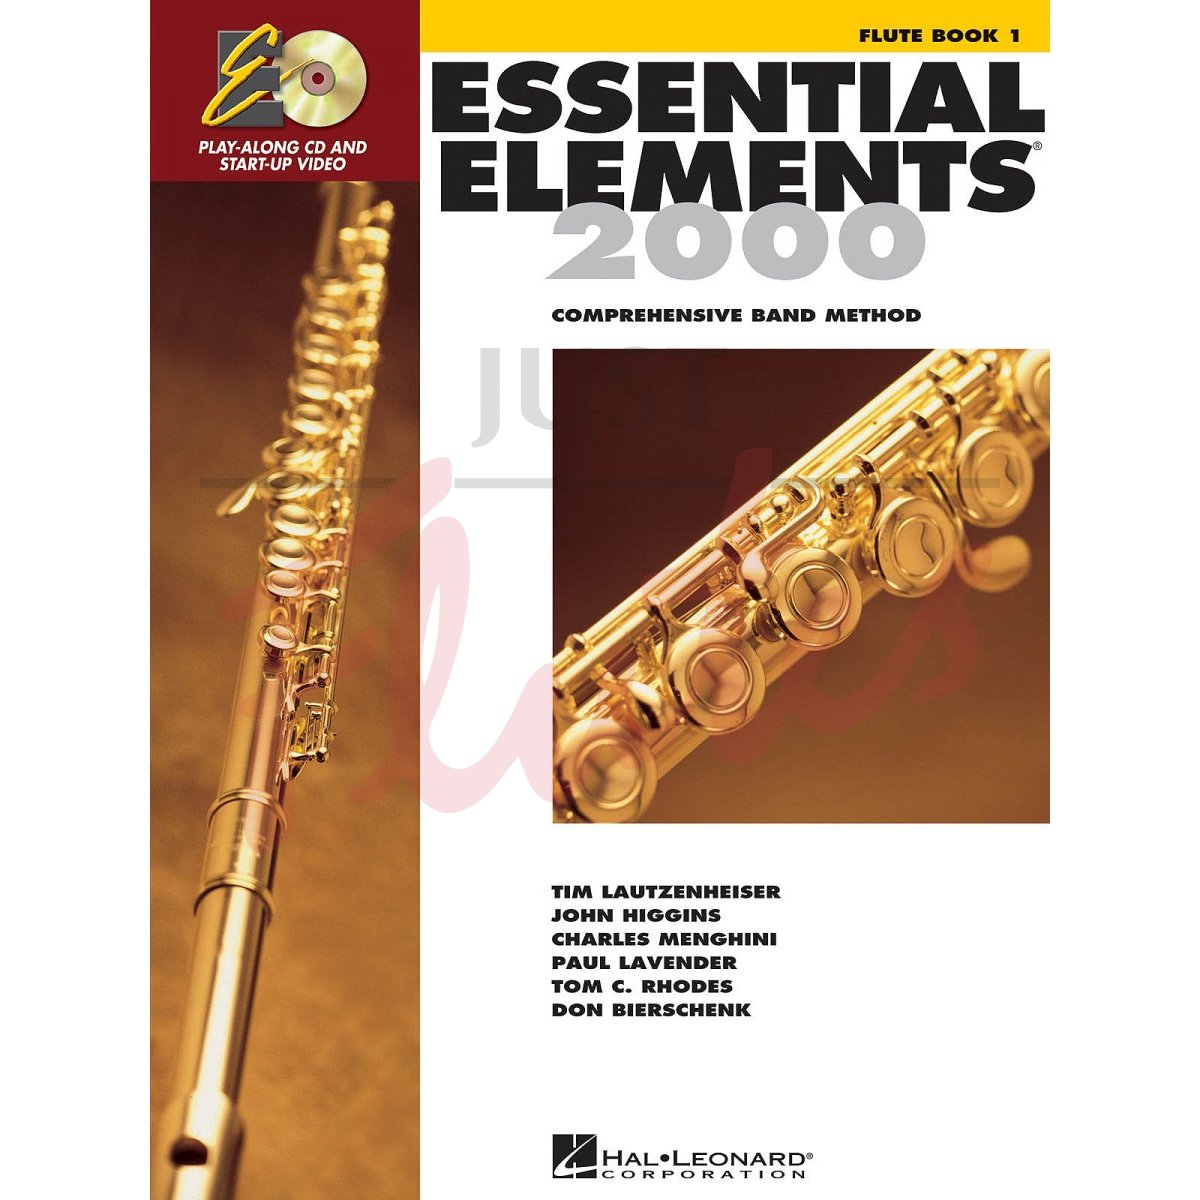 Essential Elements 2000 Book 1 [Flute]